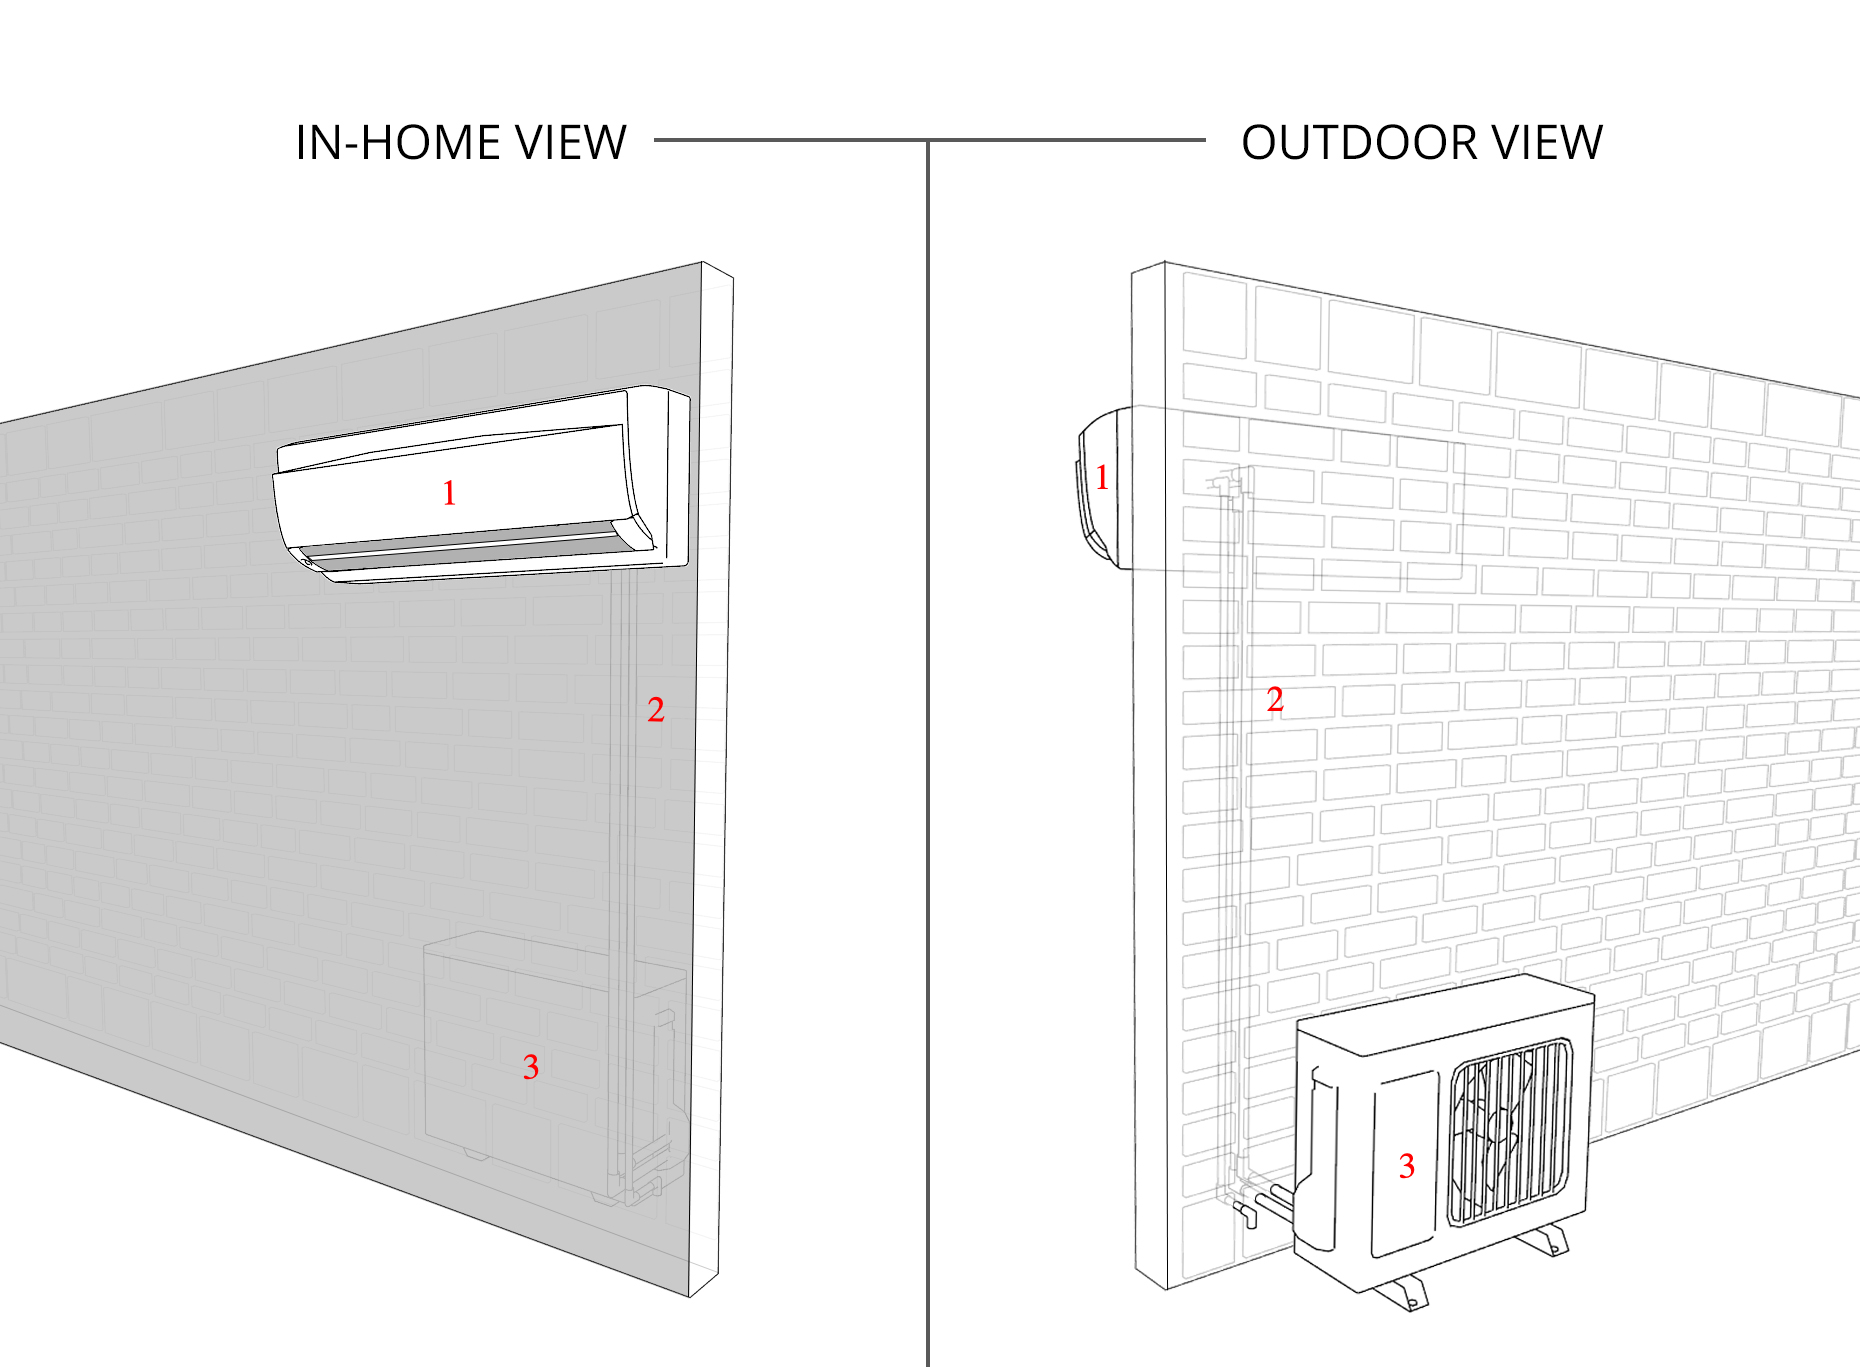 Details of how a ductless ac system works